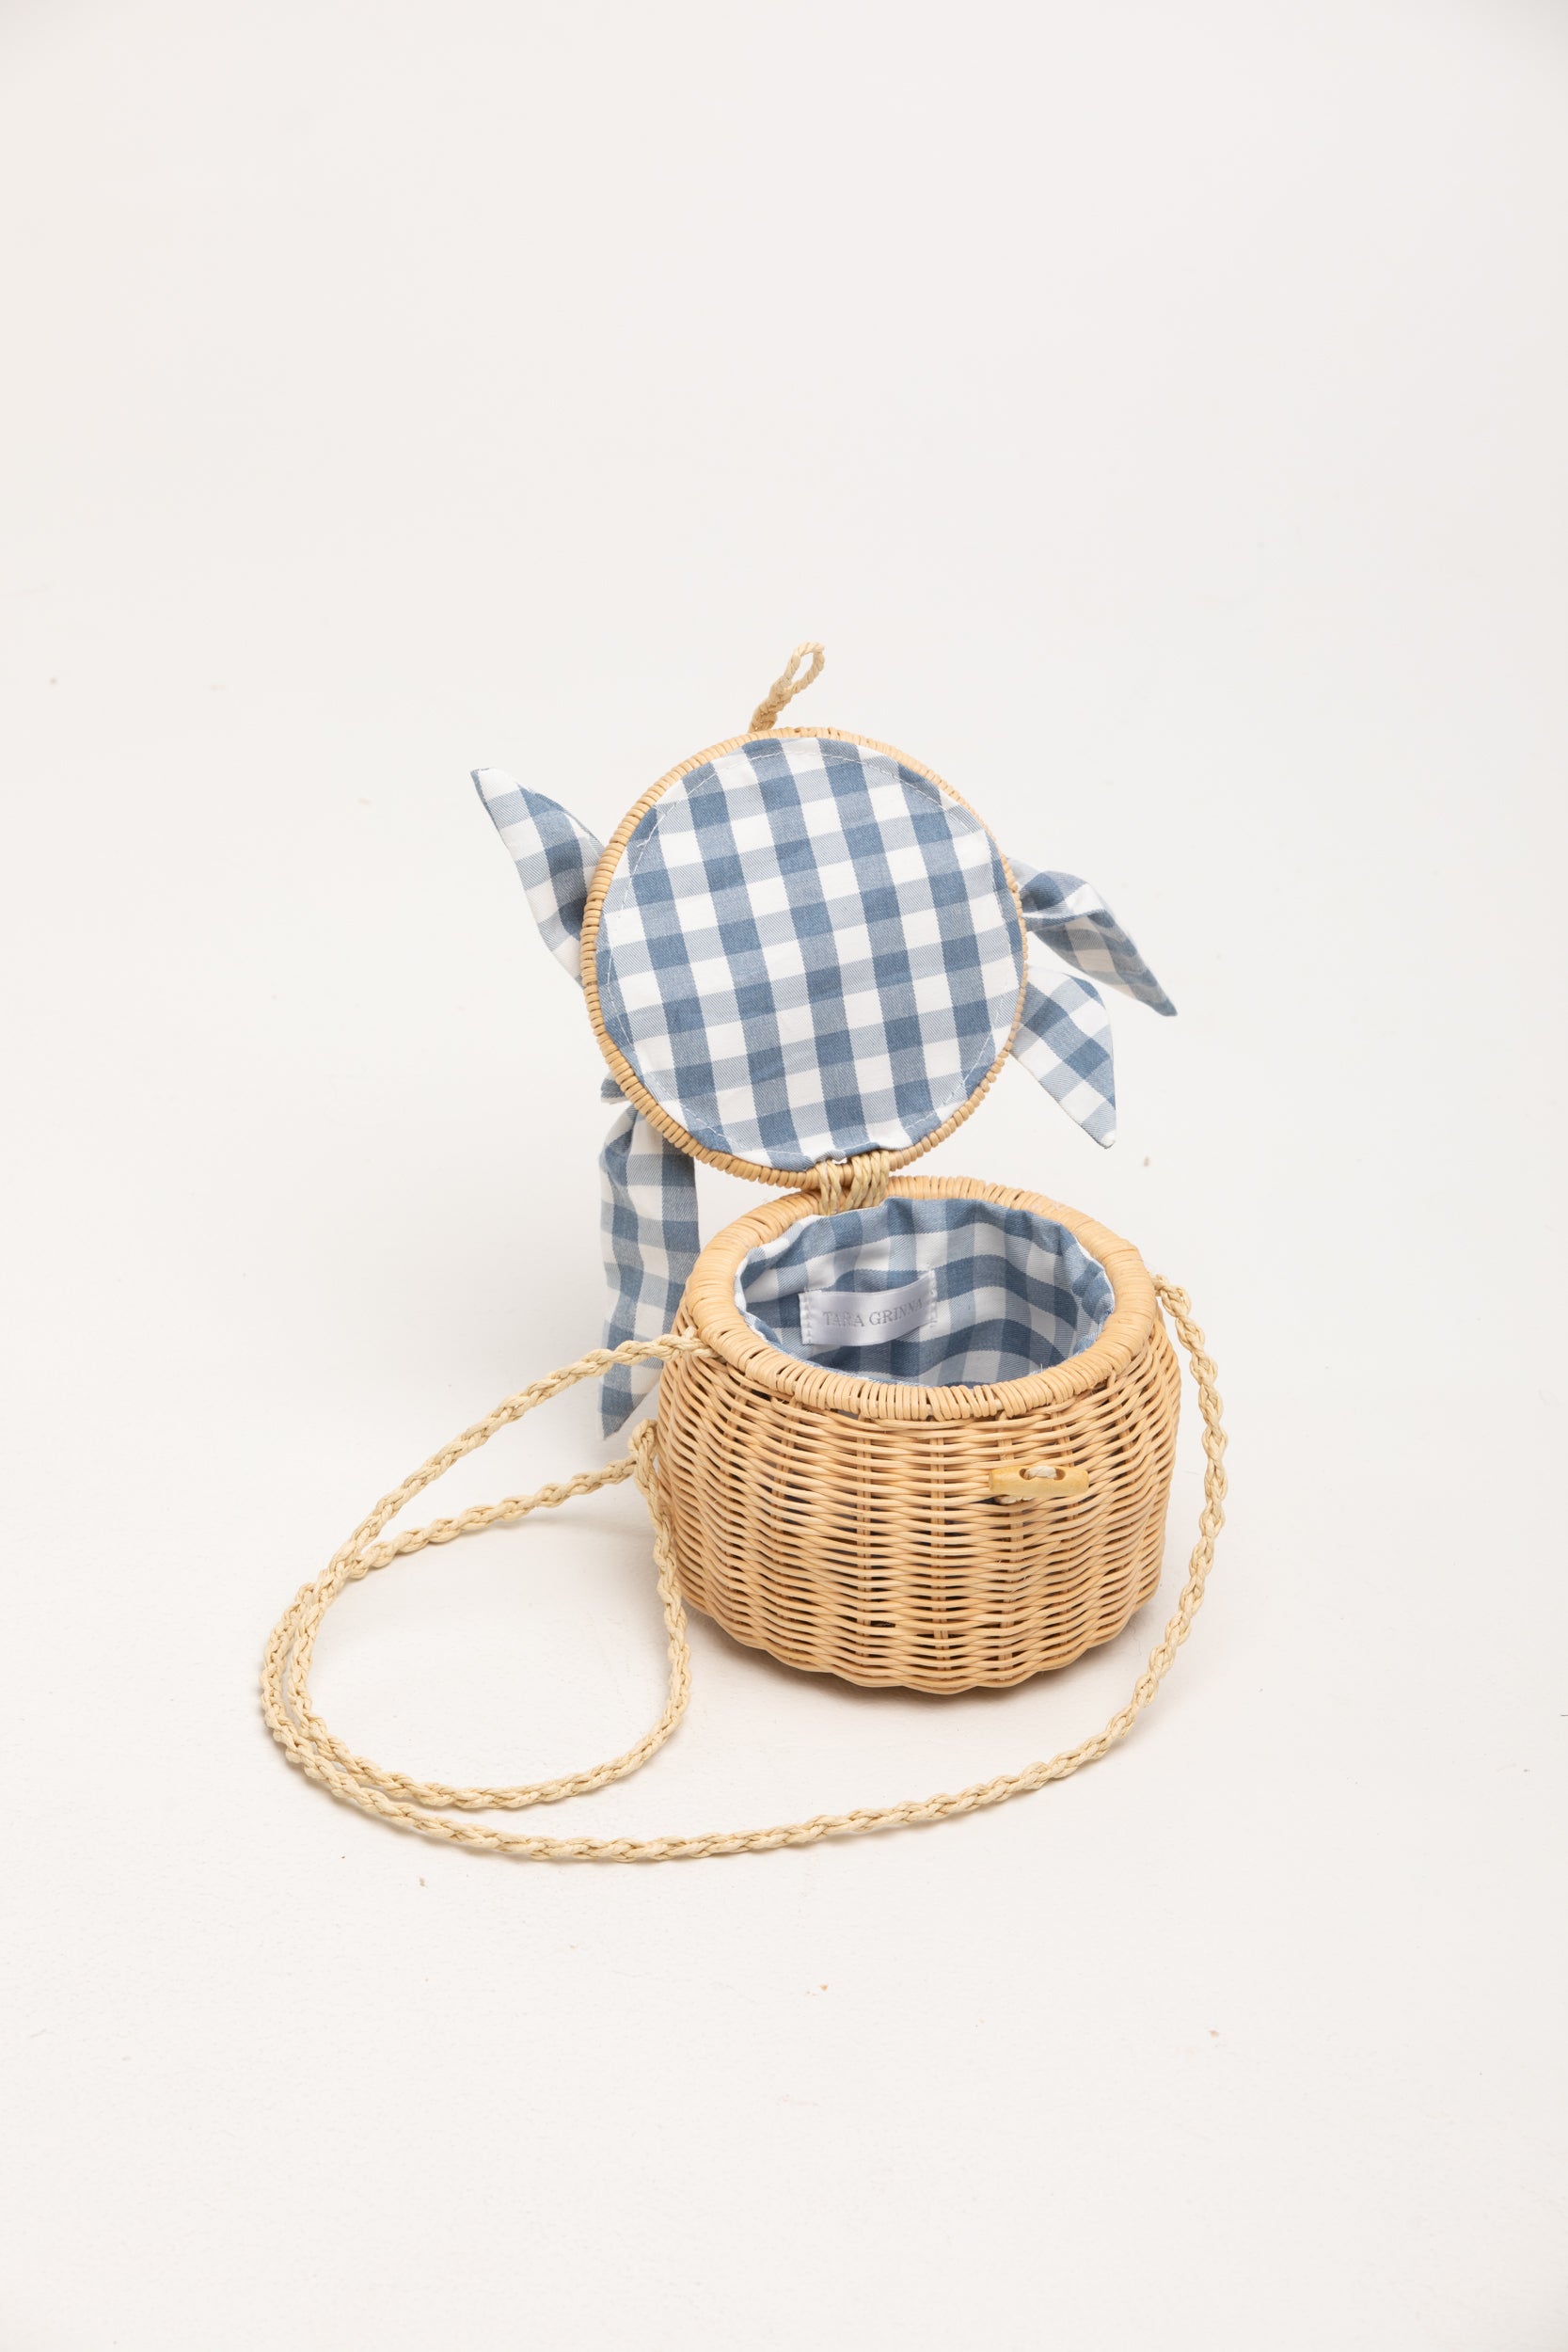 City Lights Collection-Picnic Wicker Hand Bag in Light Blue